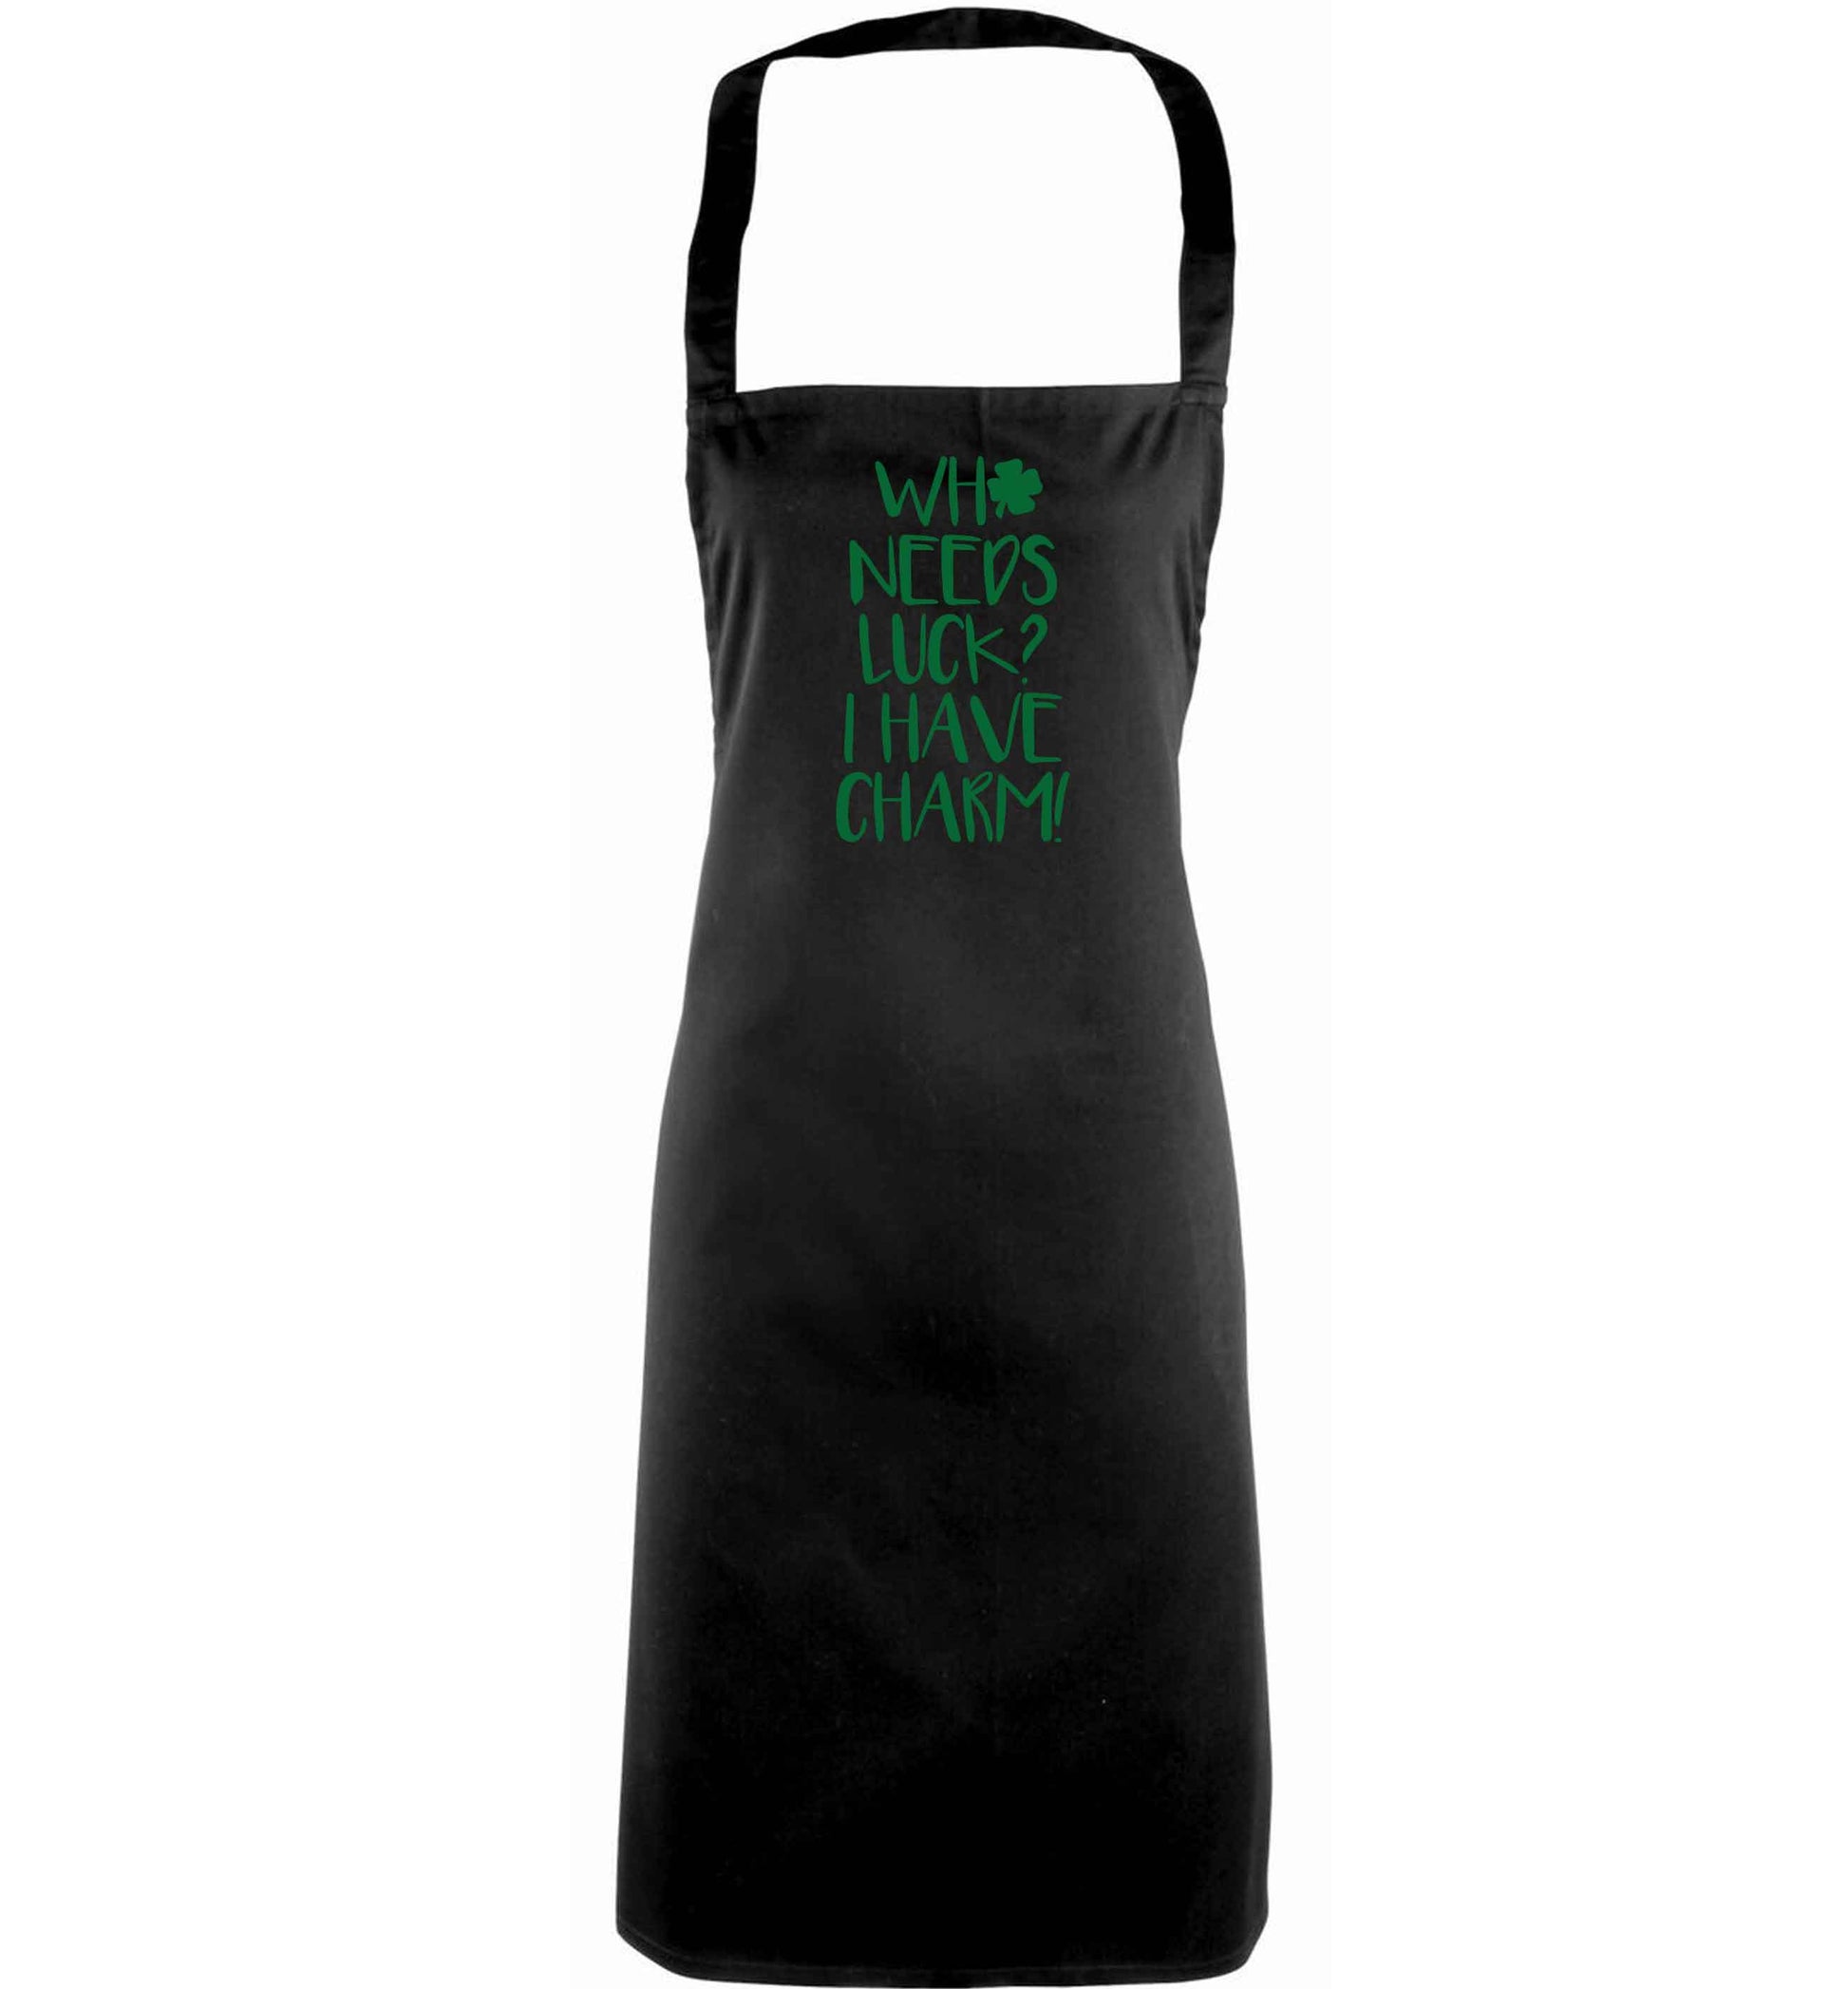 Who needs luck? I have charm! adults black apron